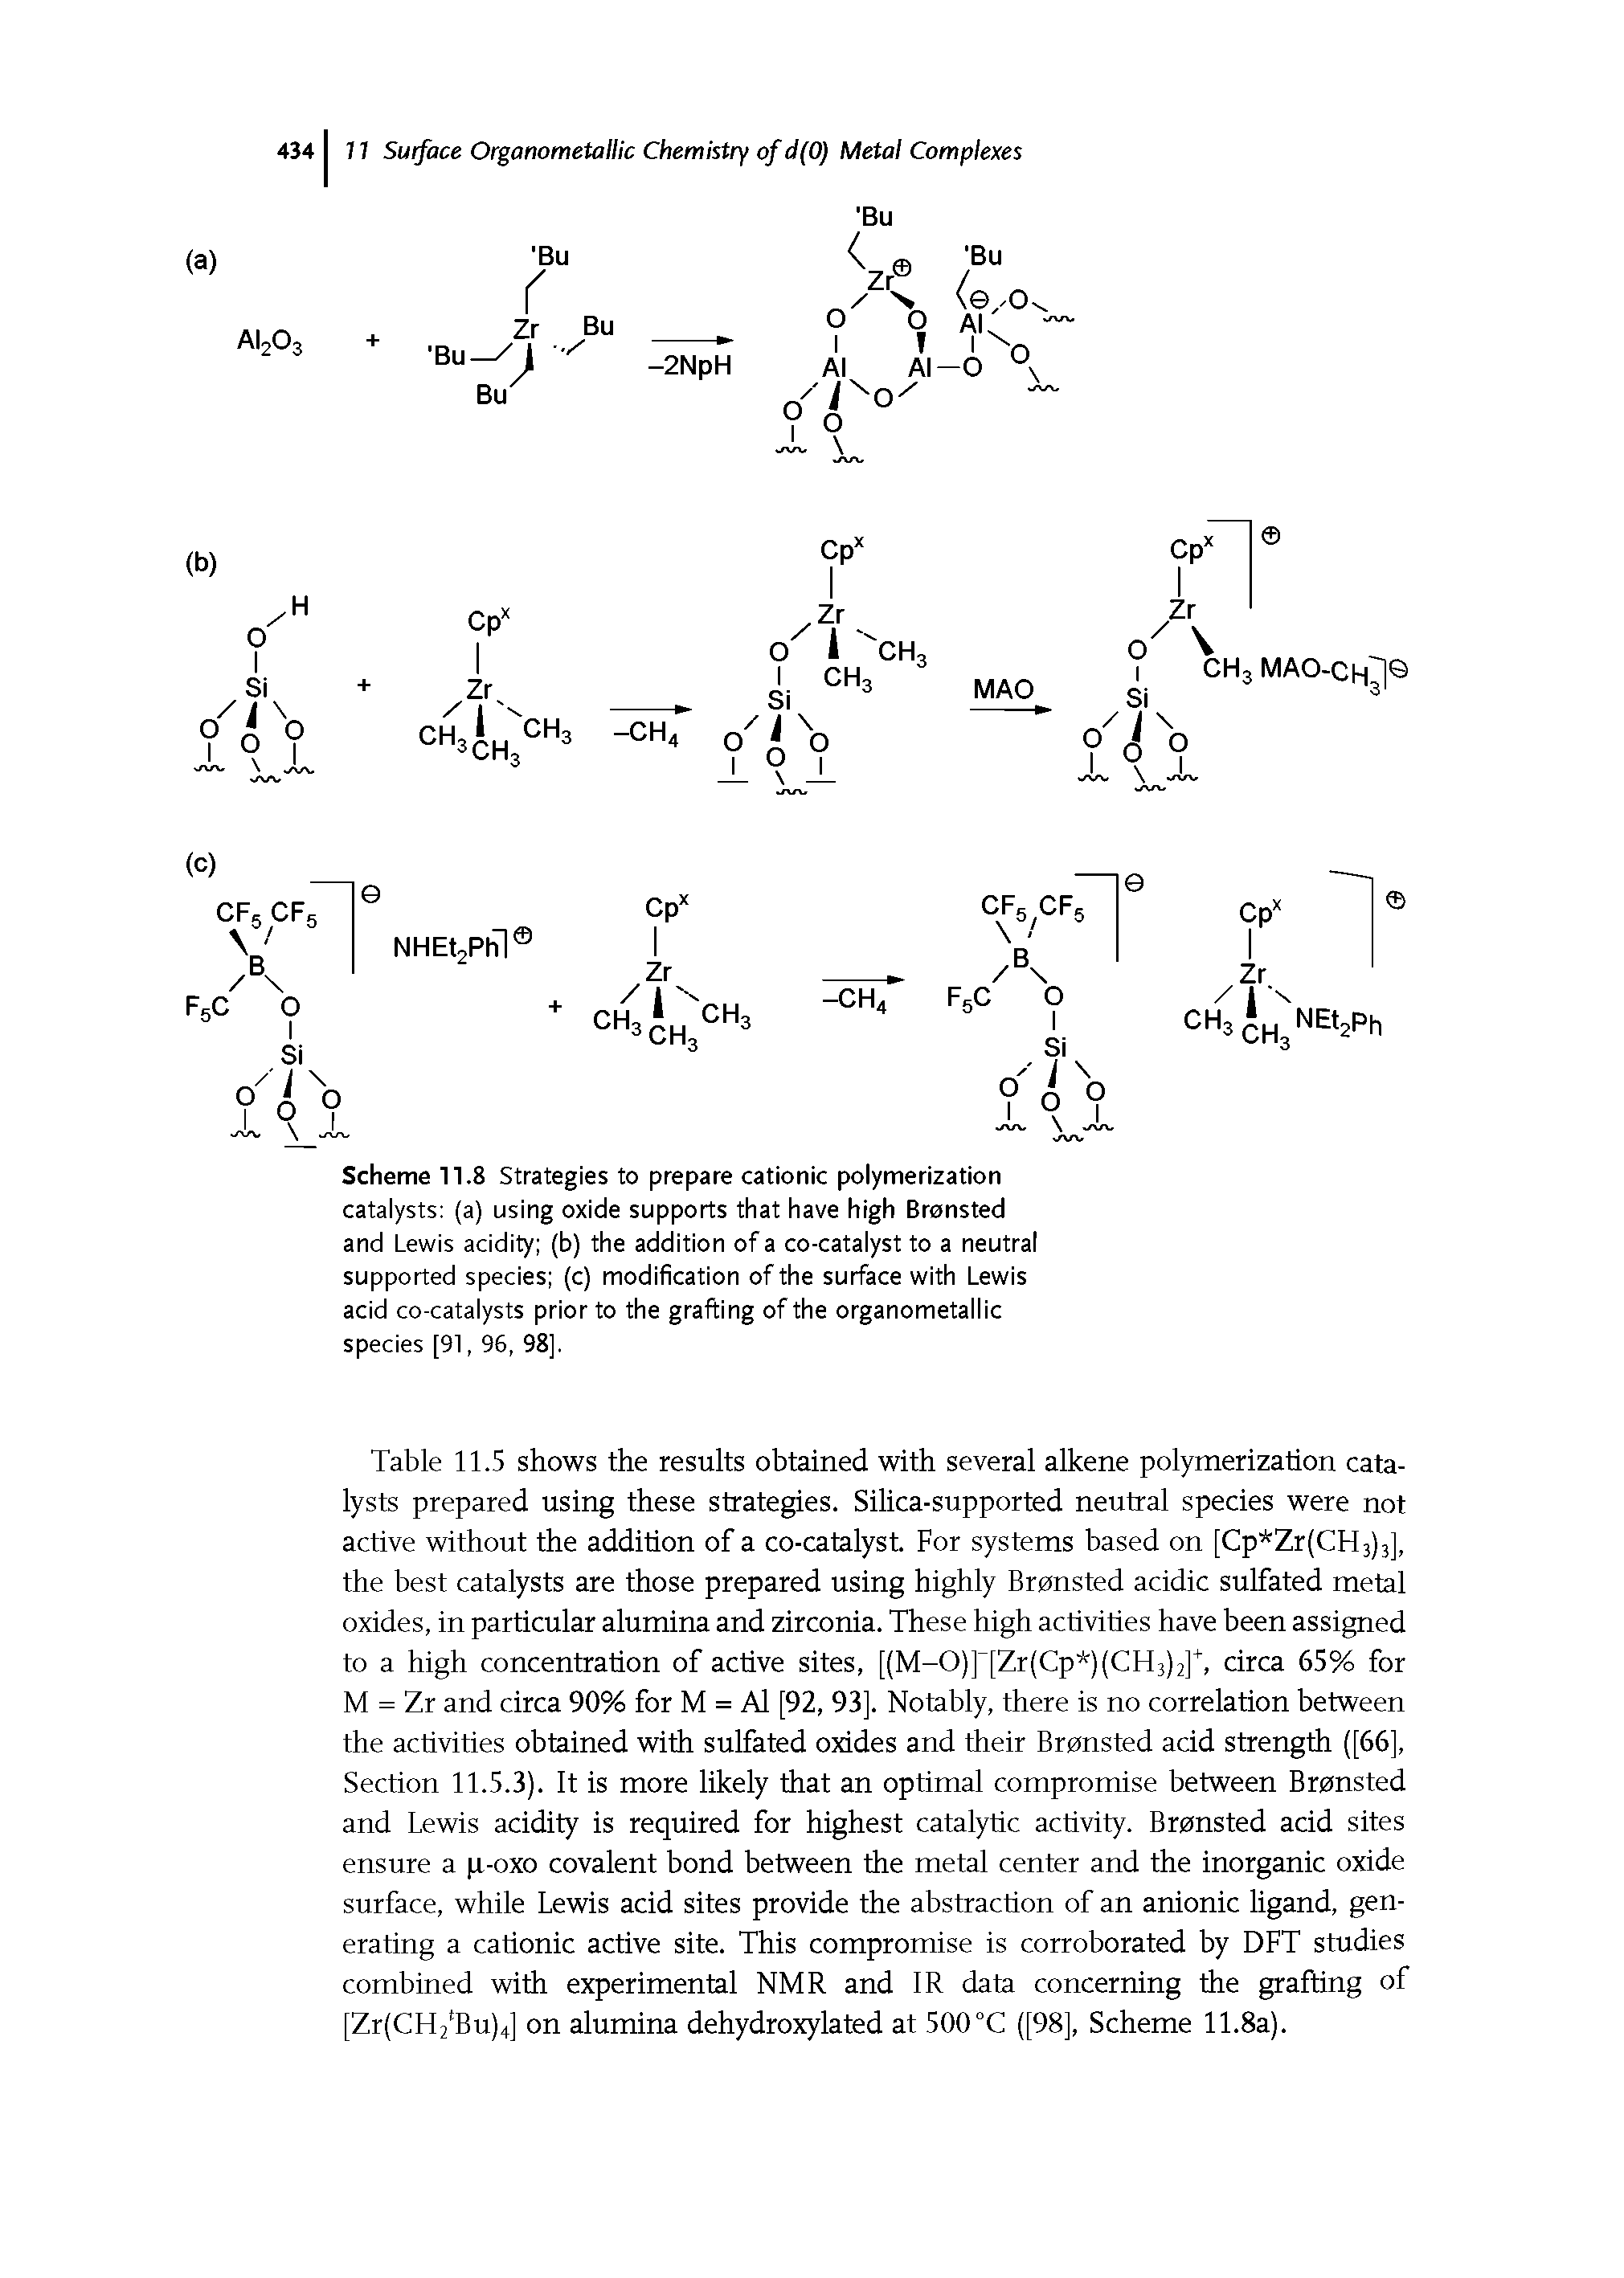 Scheme 77.8 Strategies to prepare cationic polymerization catalysts (a) using oxide supports that have high Bransted and Lewis acidity (b) the addition of a co-catalyst to a neutral supported species (c) modification of the surface with Lewis acid co-catalysts prior to the grafting of the organometallic species [91, 96, 98].